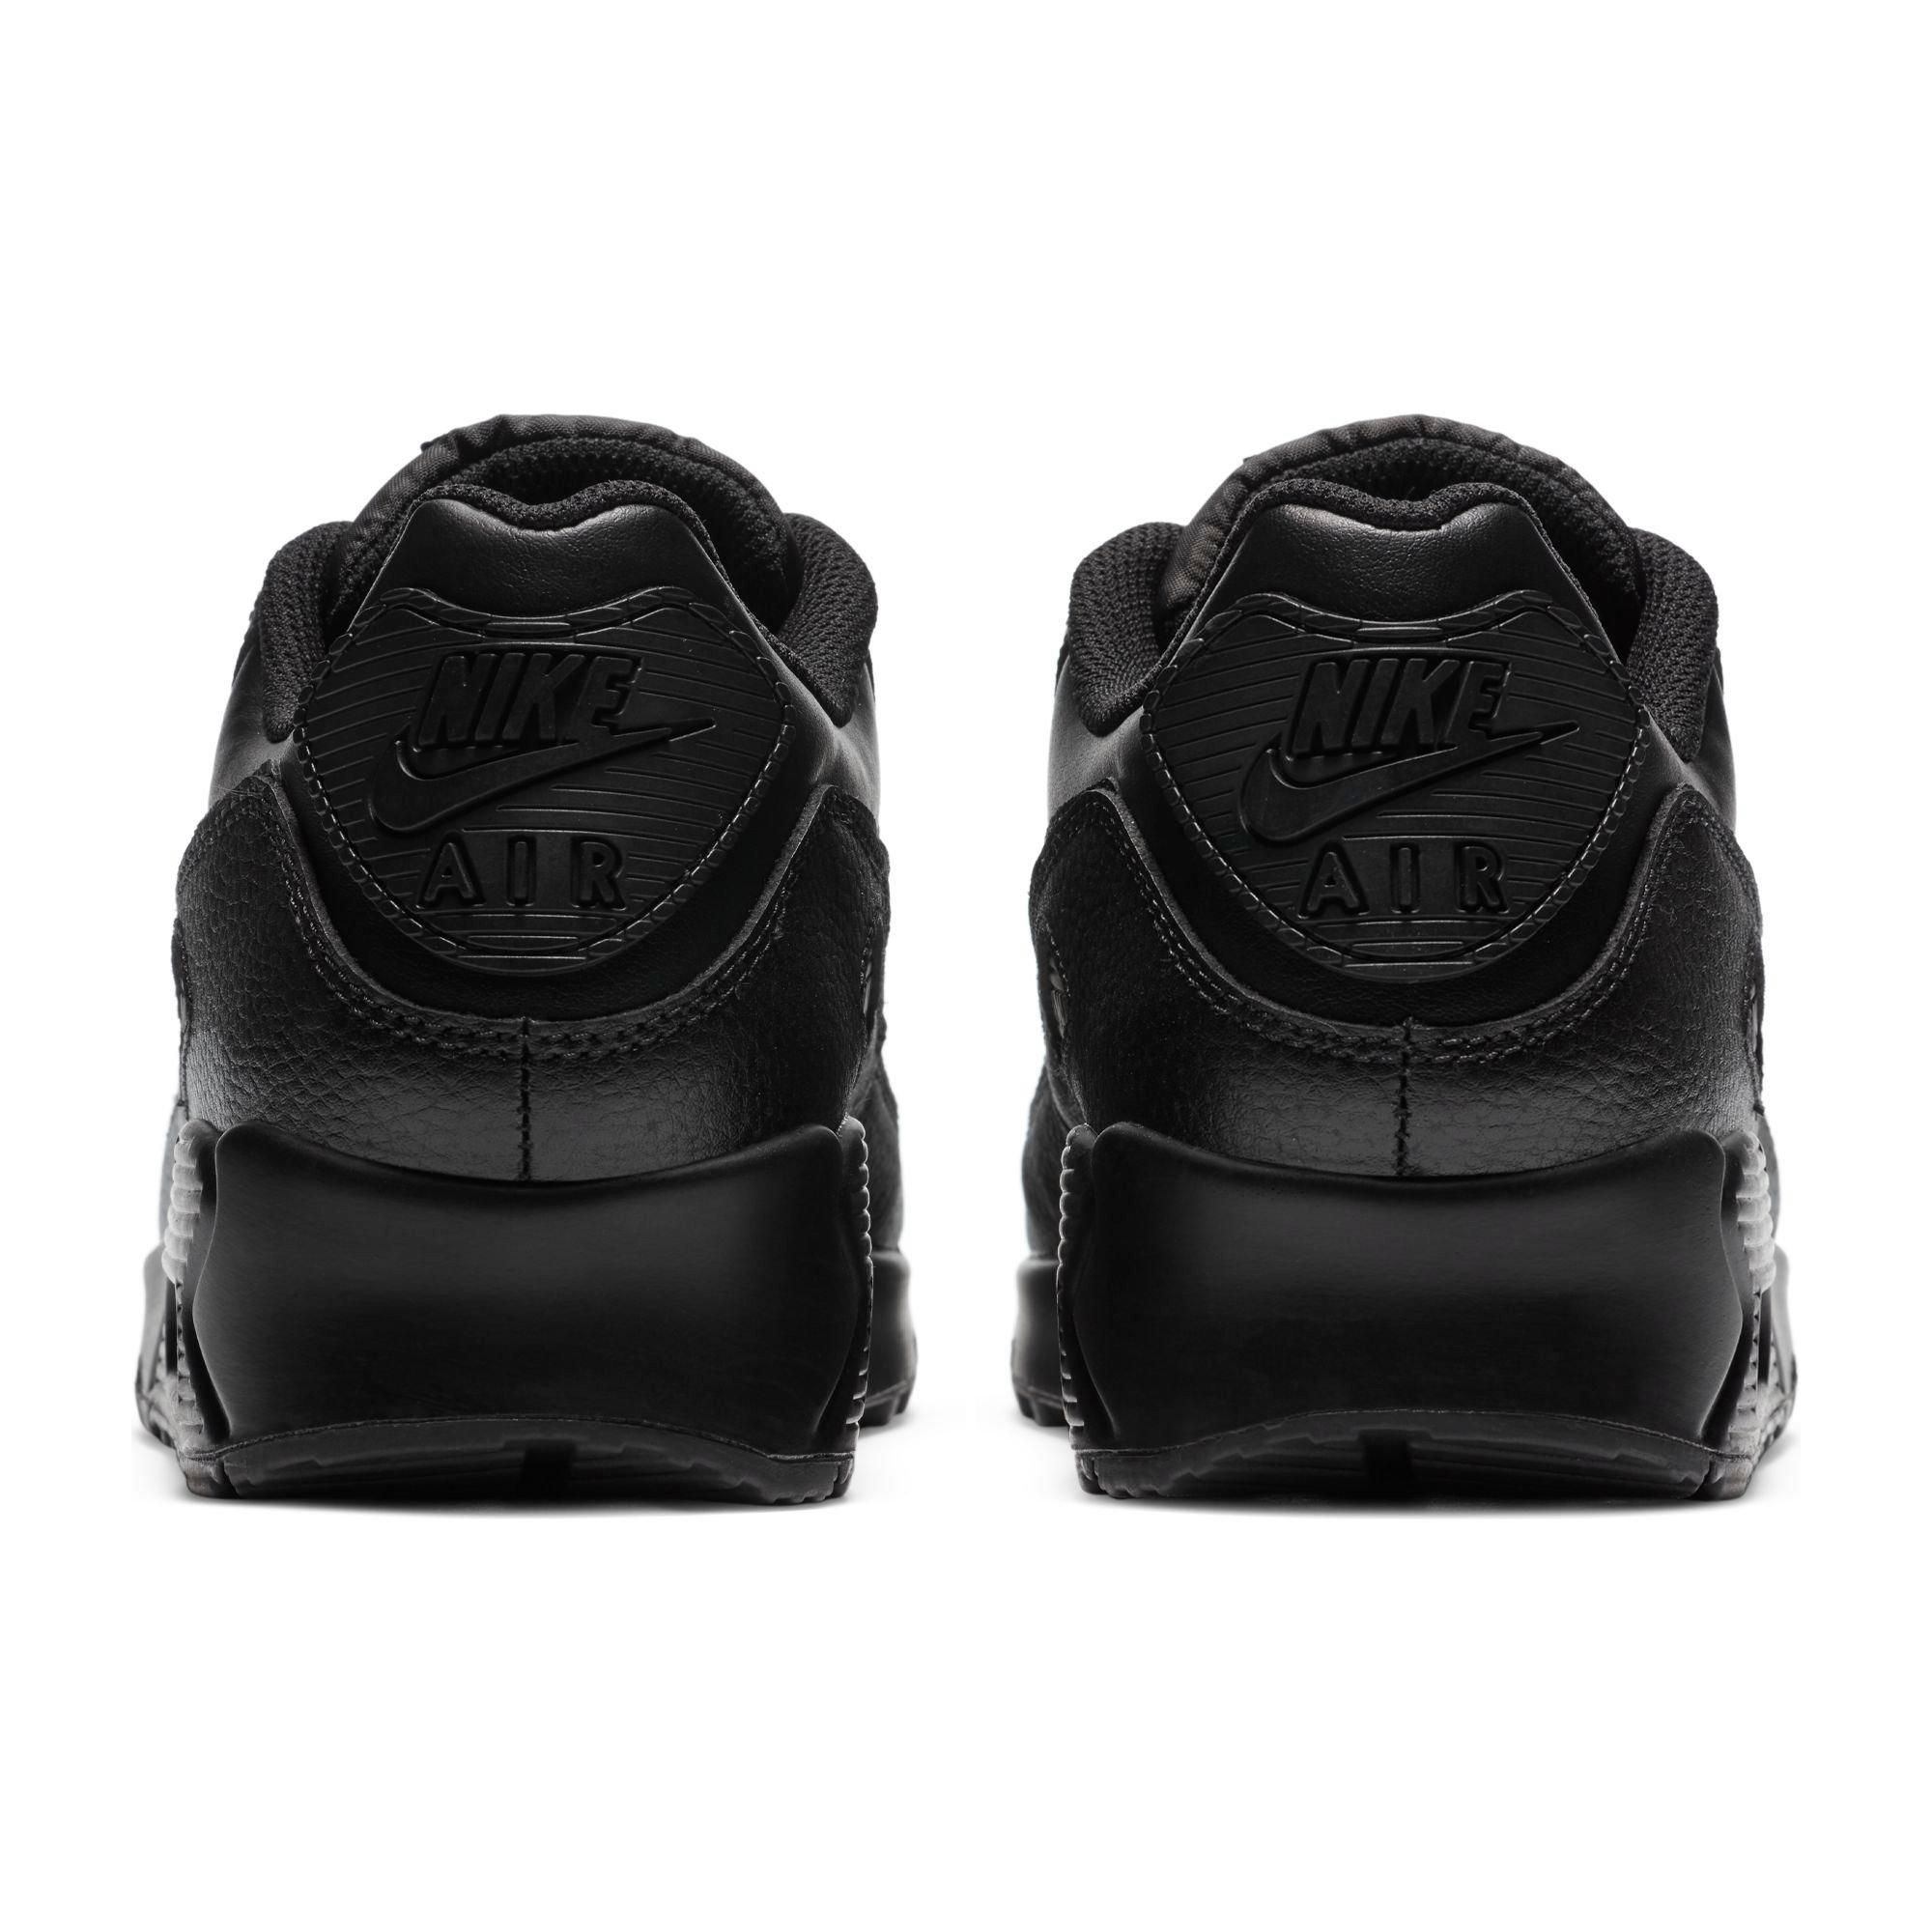 dialect Edelsteen tint Nike Air Max 90 Leather "Black" Men's Shoes